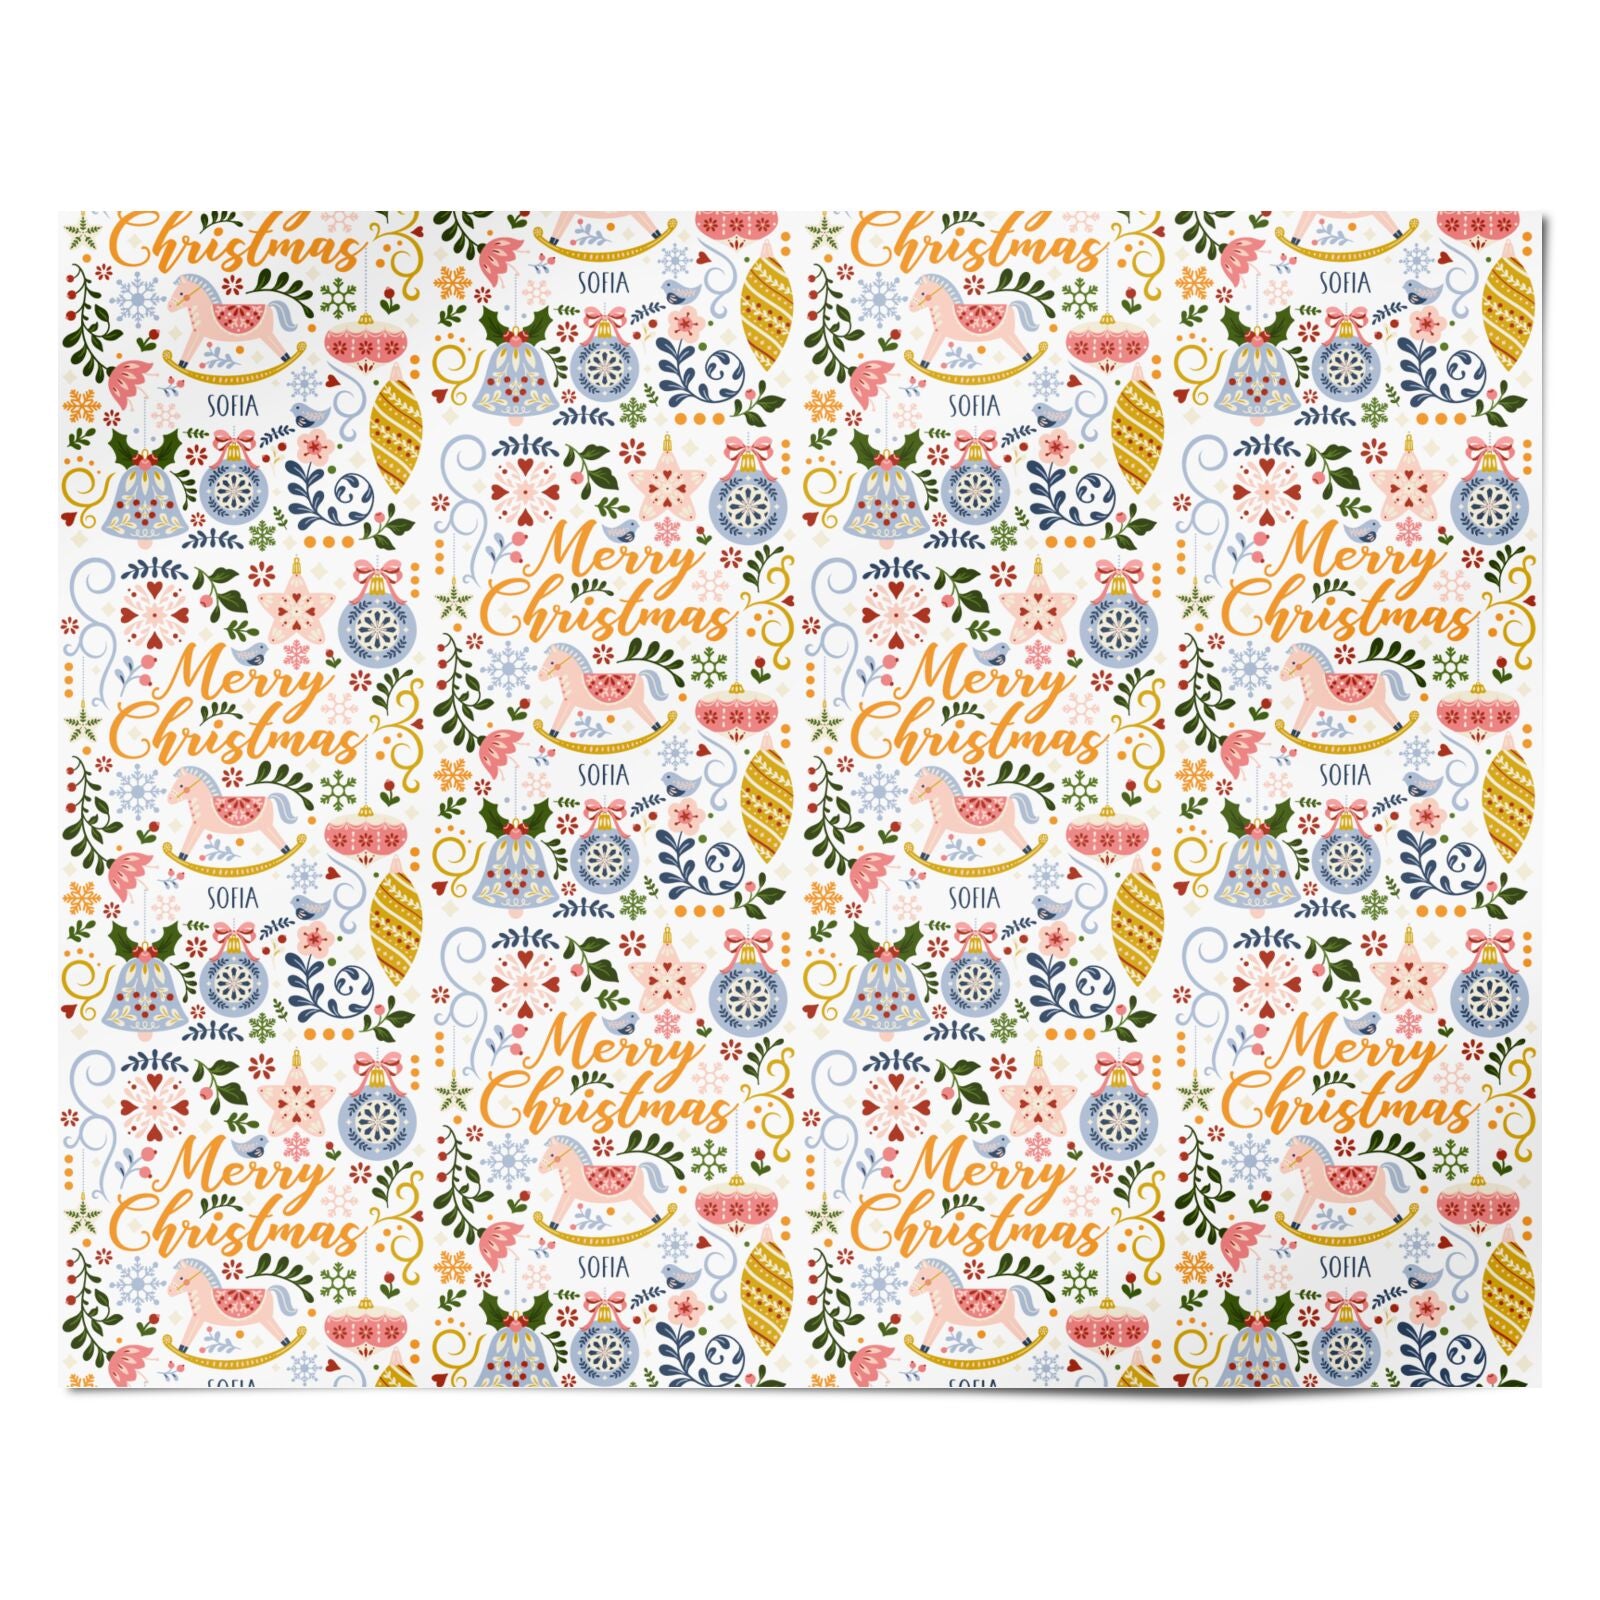 Merry Christmas Illustrated Personalised Wrapping Paper Alternative